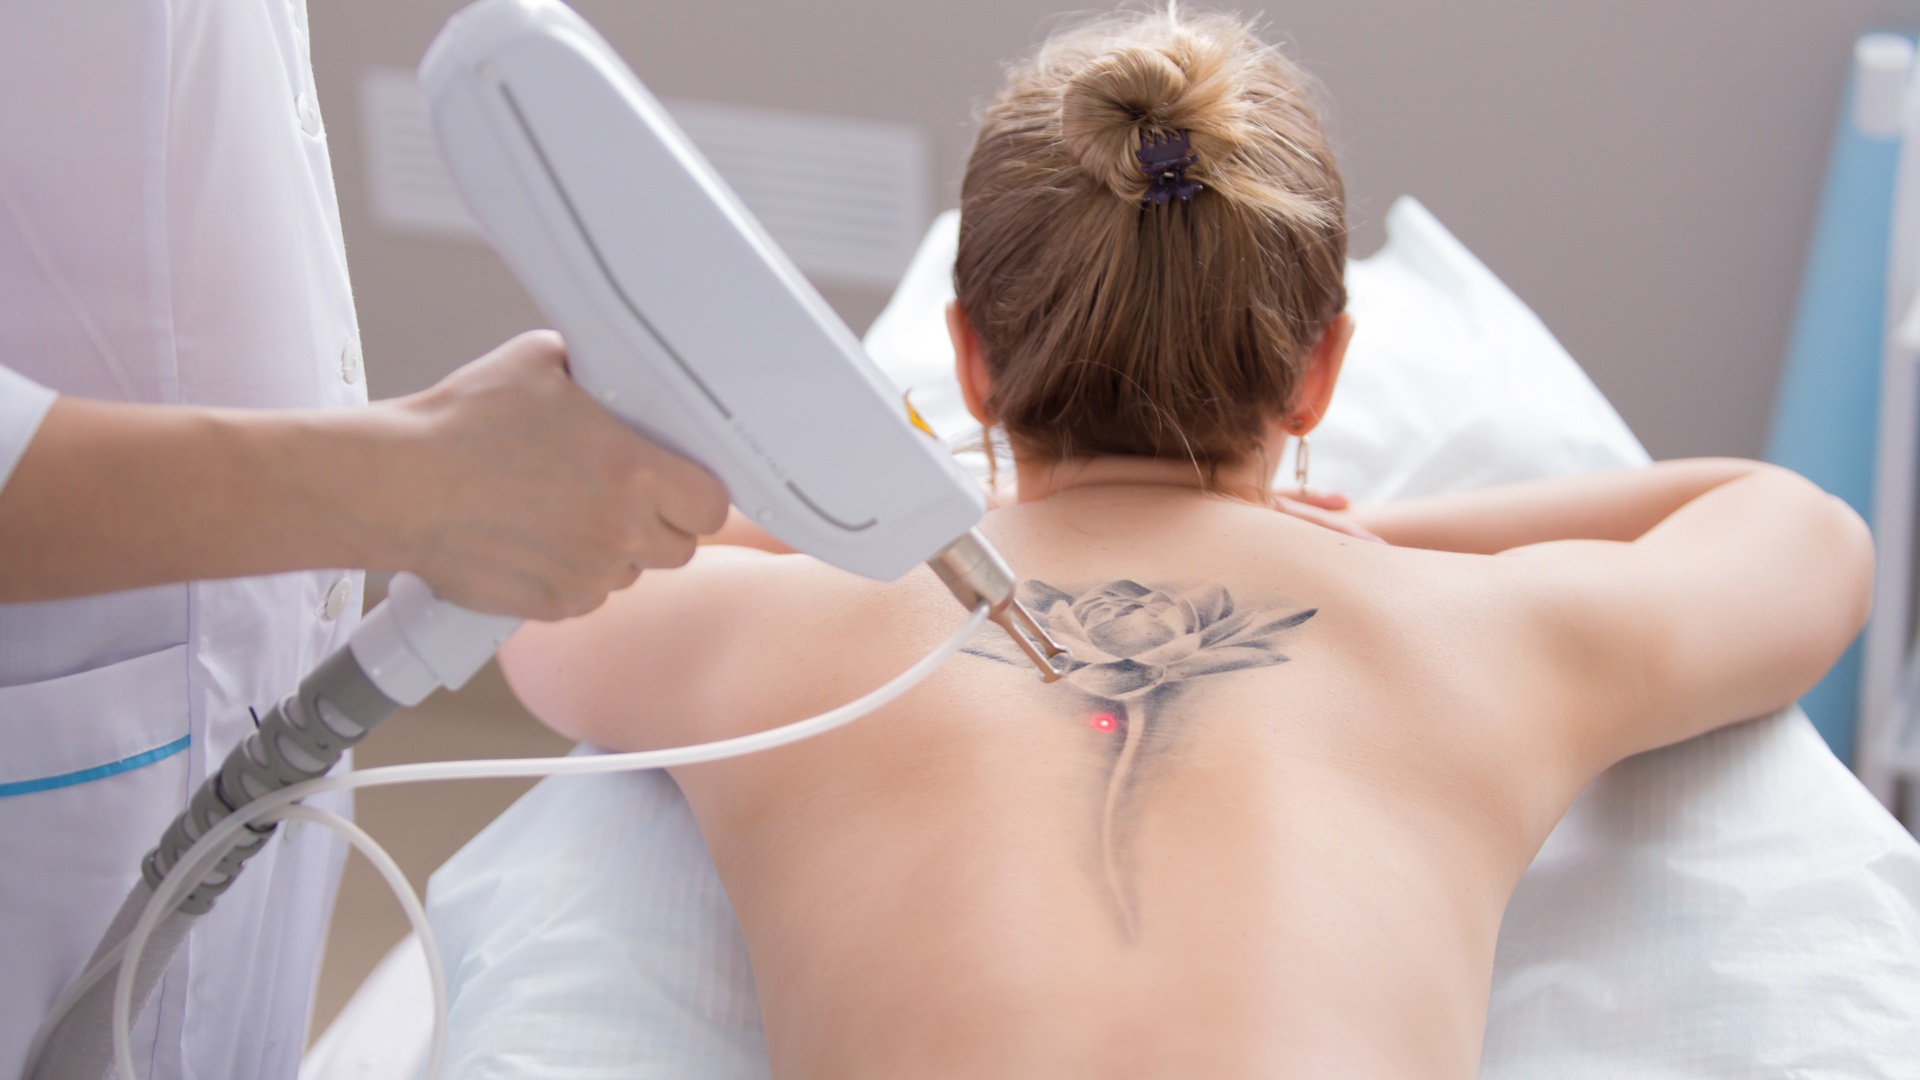 Laser Tattoo Removal Los Angeles  Orange County  Skin Perfect Medical